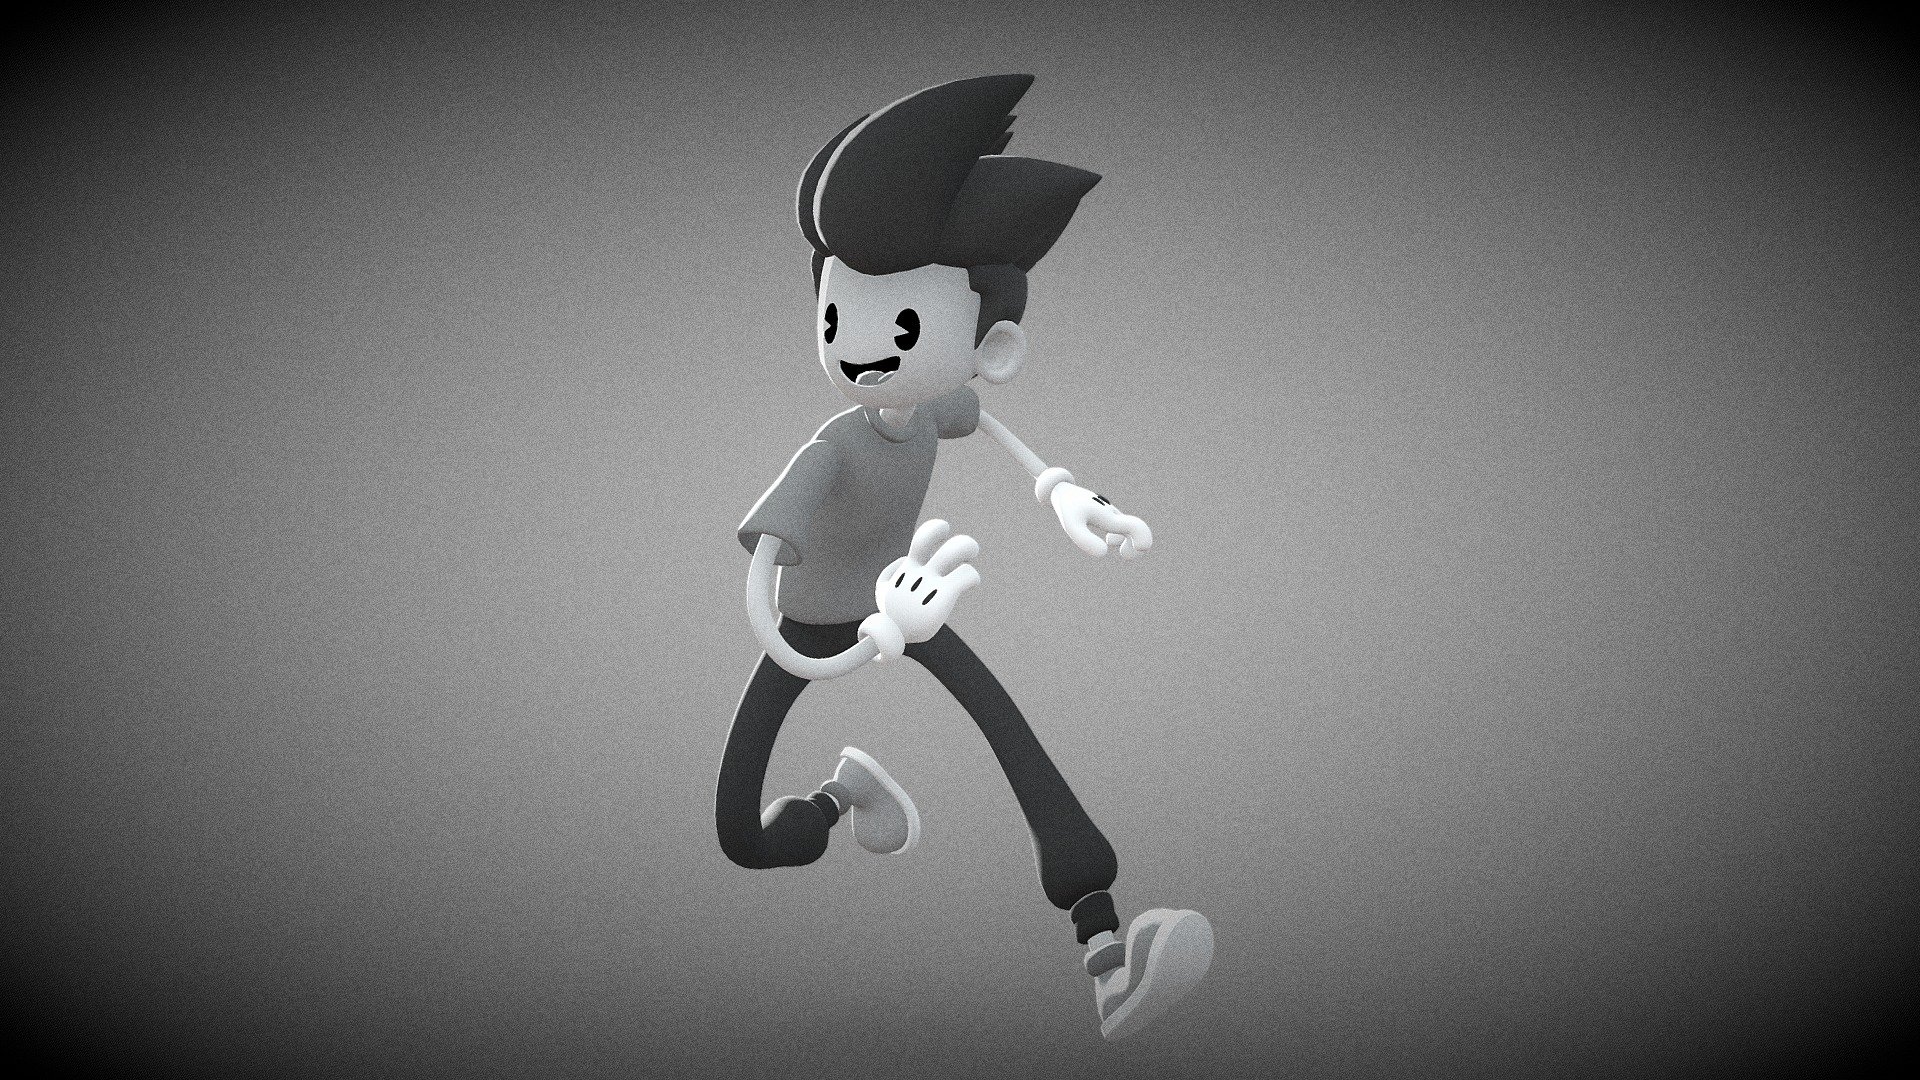 I was inspired to make this rubber hose style model of my own character! It also made for some really good practice for rigging noodle joints in Blender! I learned a lot from this. Y'know I'm a little surprised it took me this long to make something in this style in 3D. I love this style! and I used to attempt to draw a lot when I was kid!

Anyways I modeled and rigged this in Blender 3d model